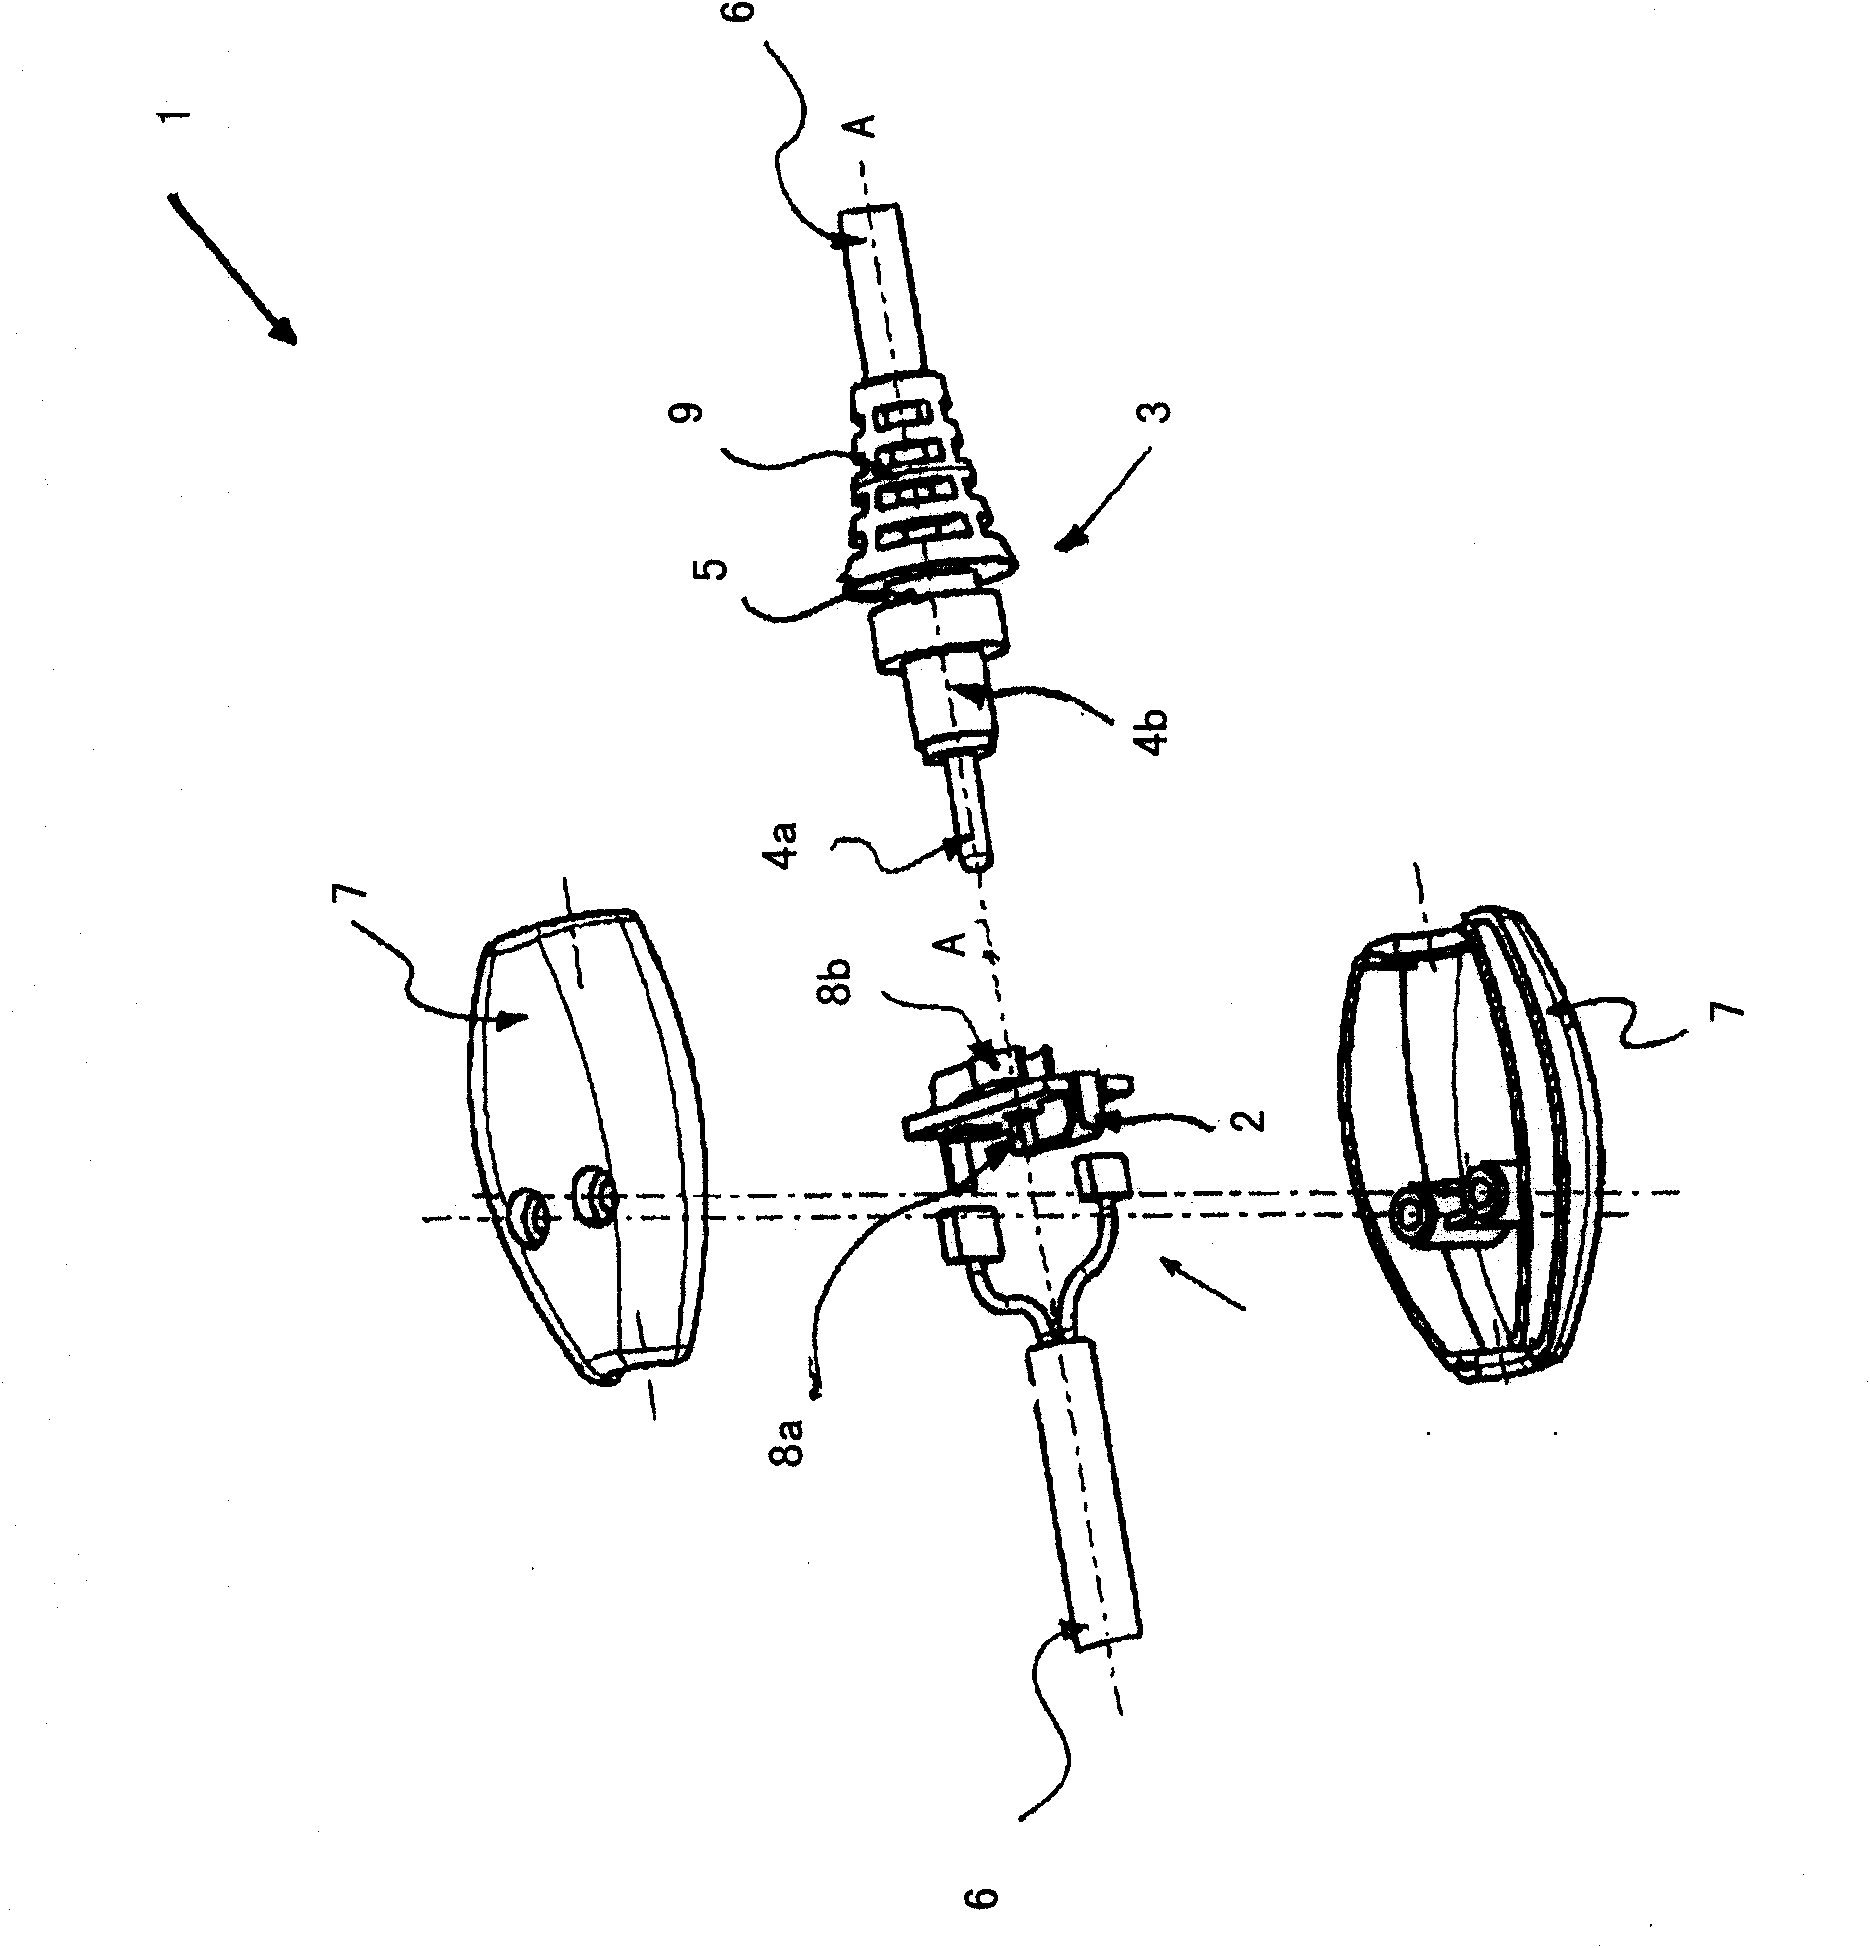 Rotating device for electrically connecting electric household appliances and electric tools